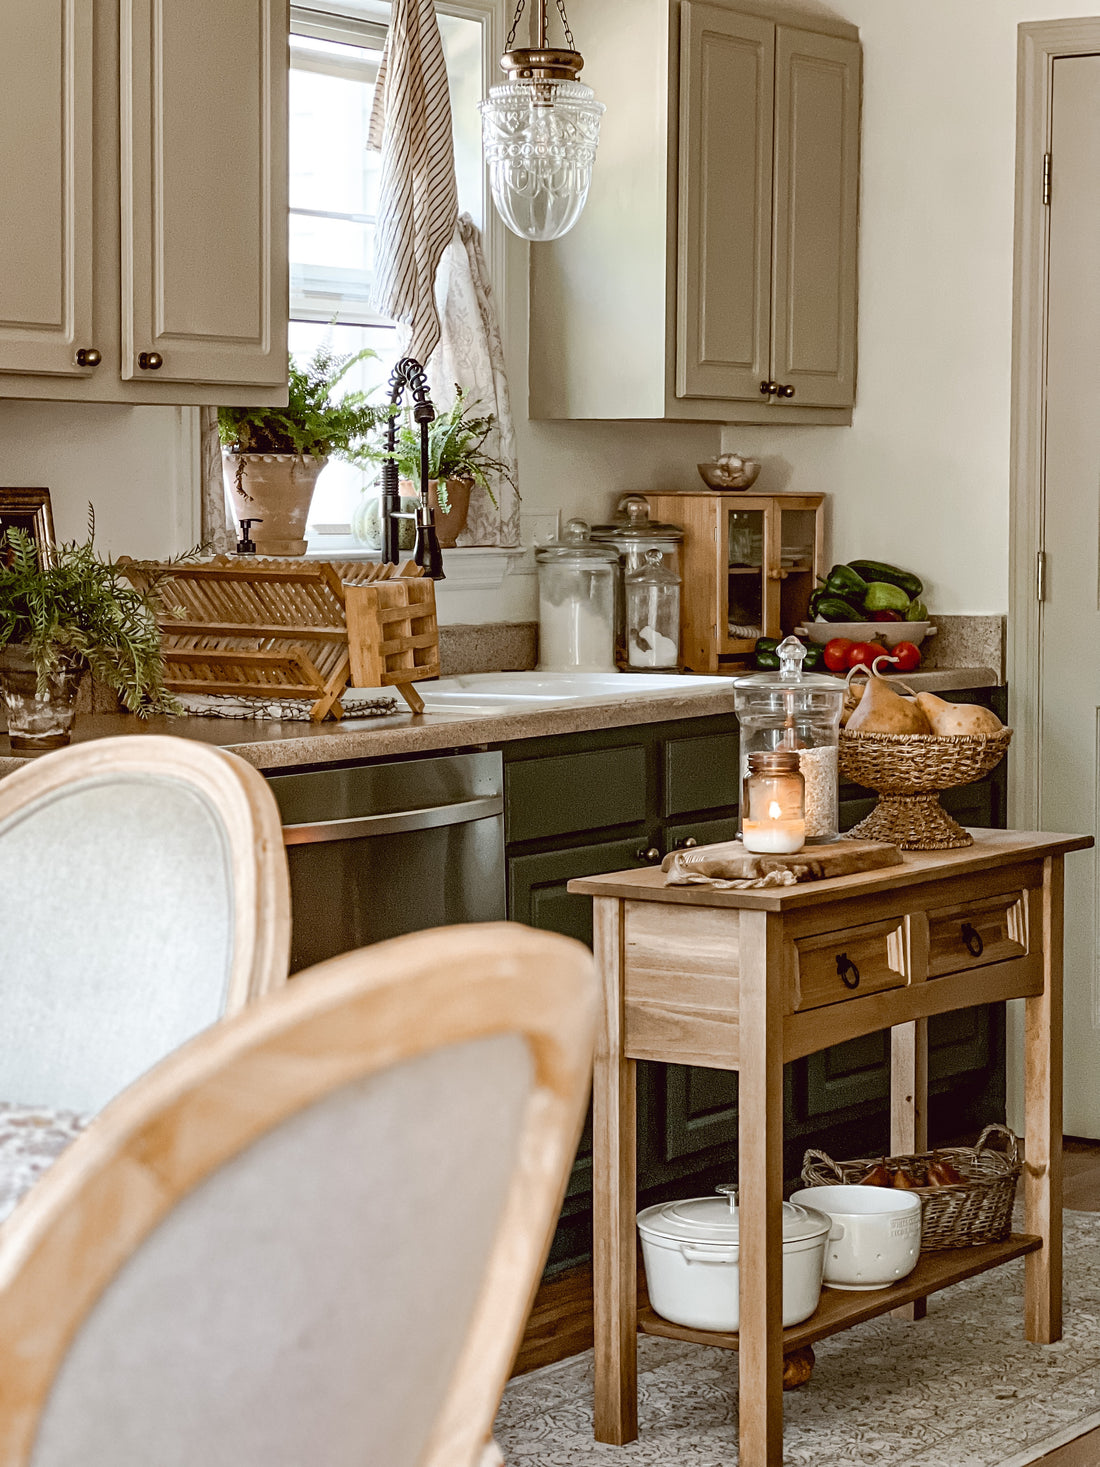 Small Kitchen Island for a Quaint Galley Kitchen